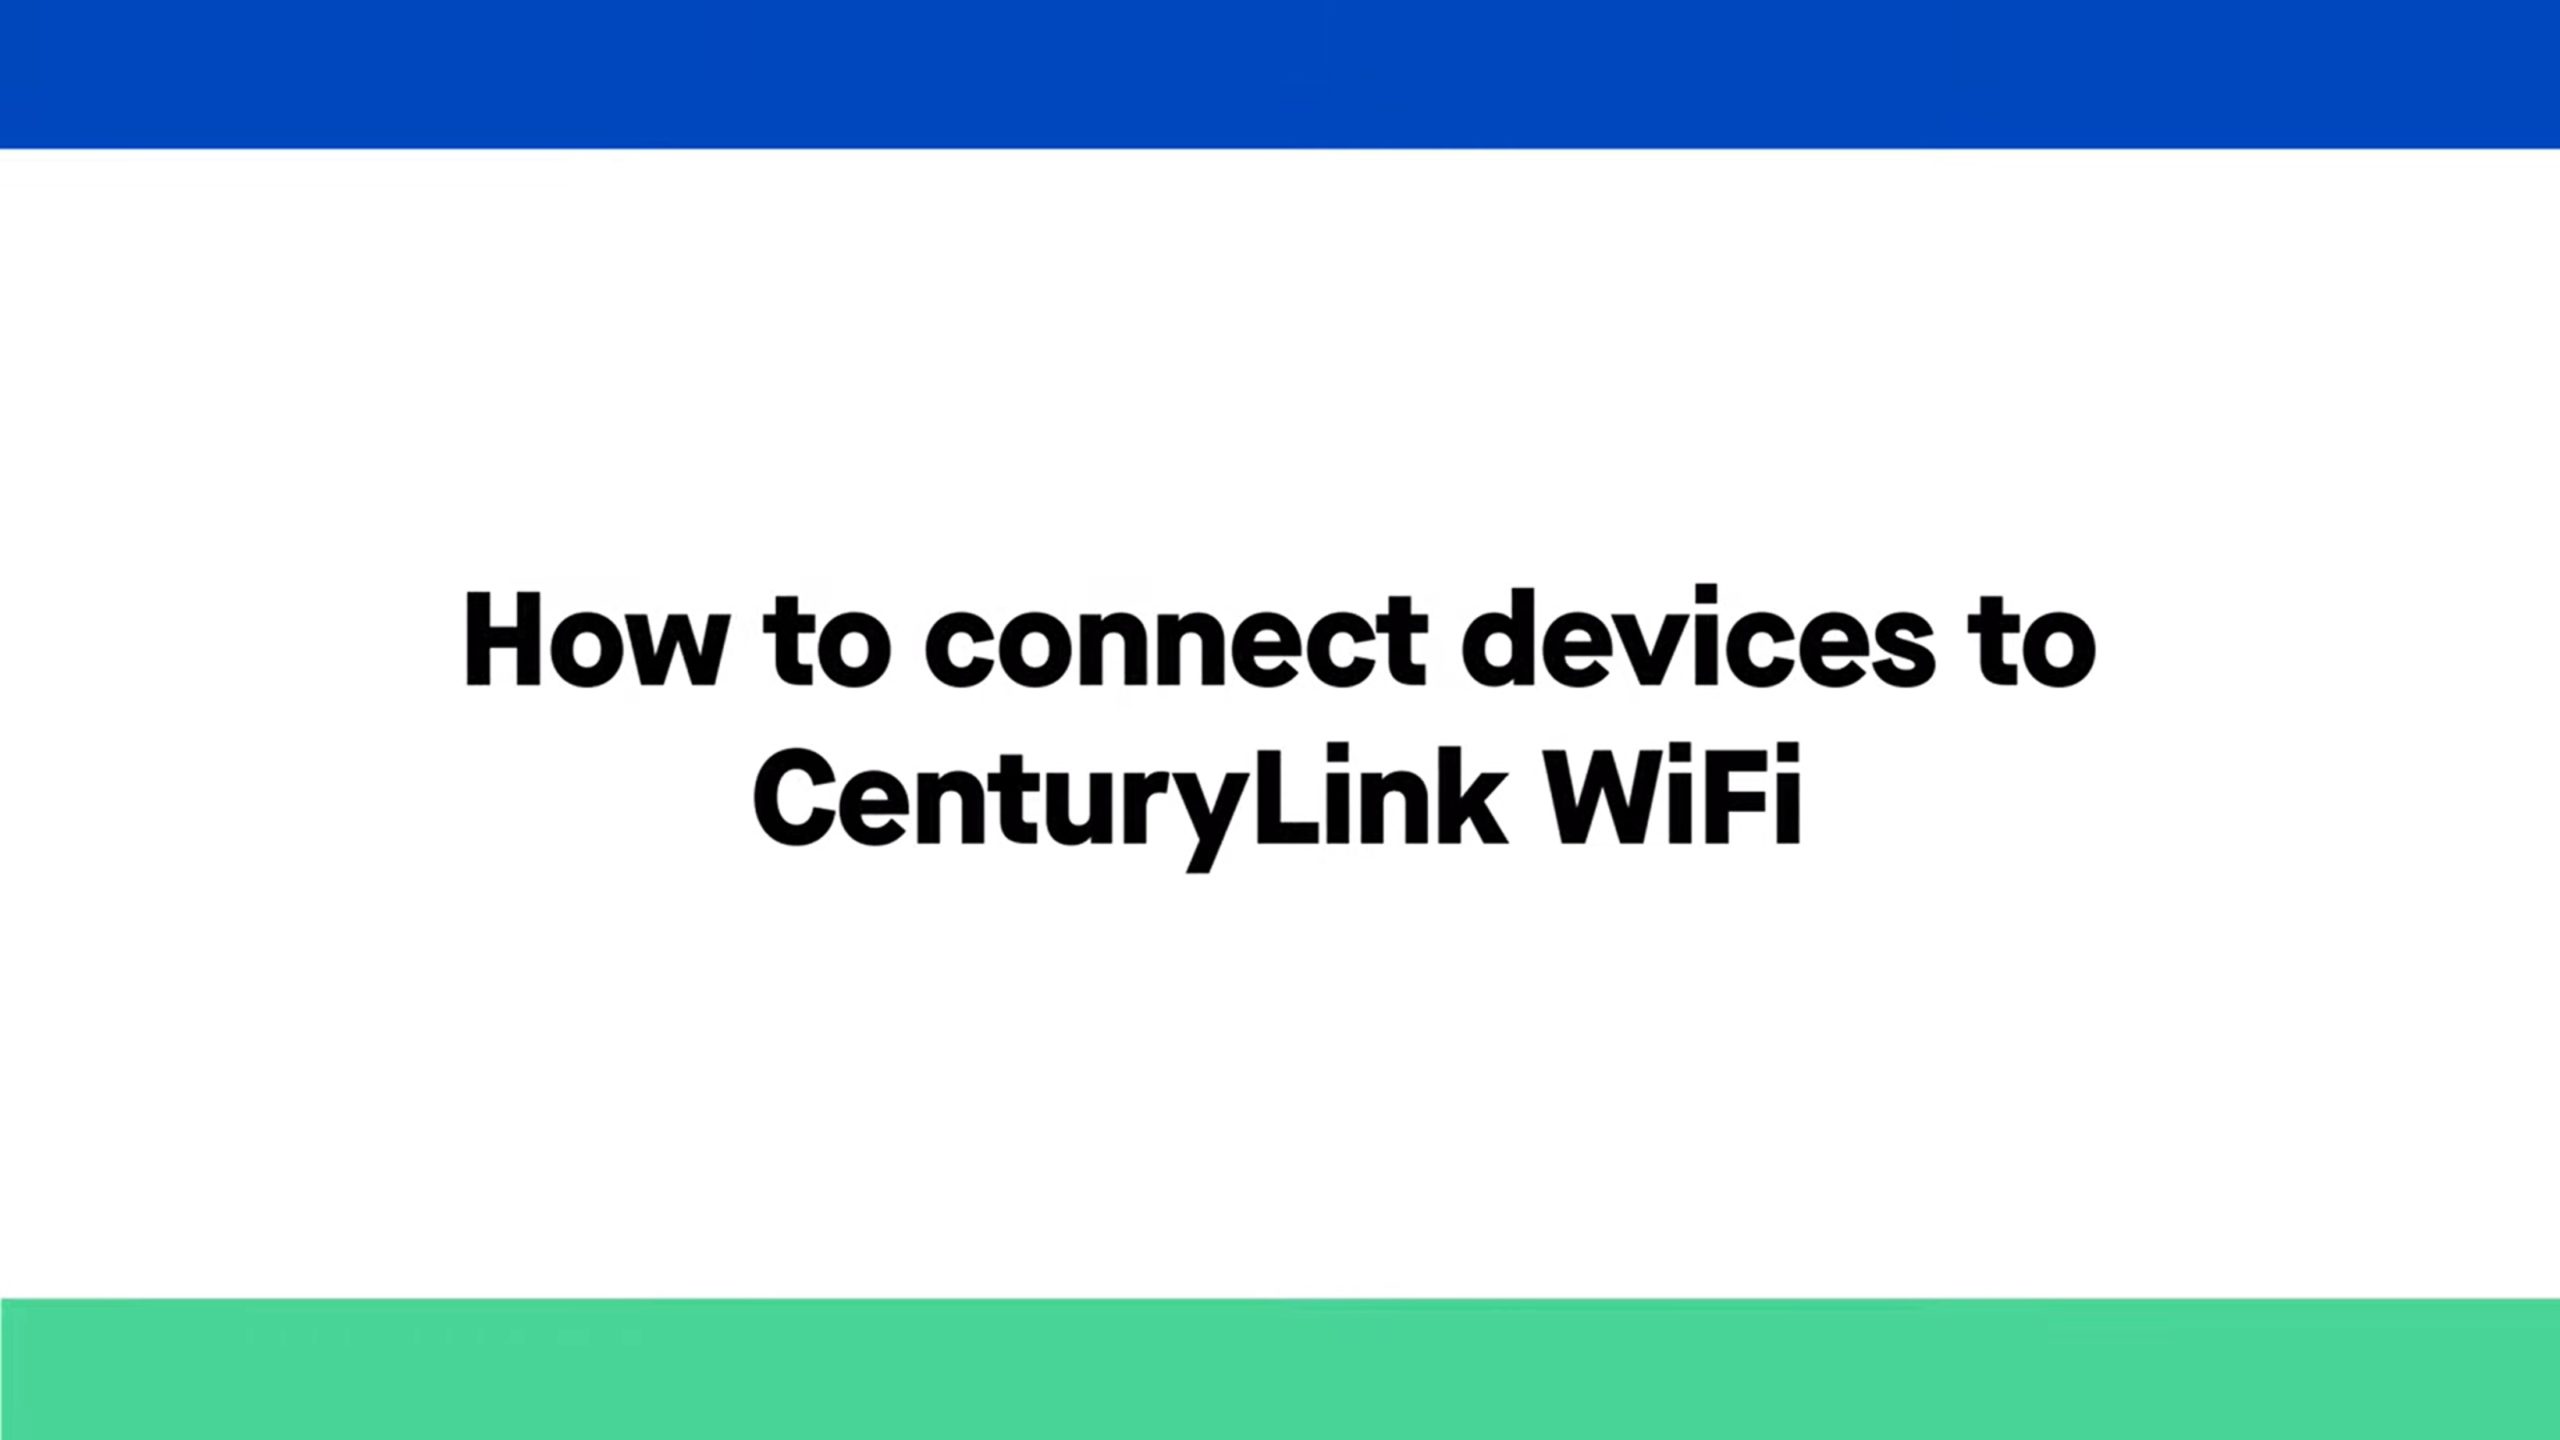 How to connect devices to CenturyLink WiFi